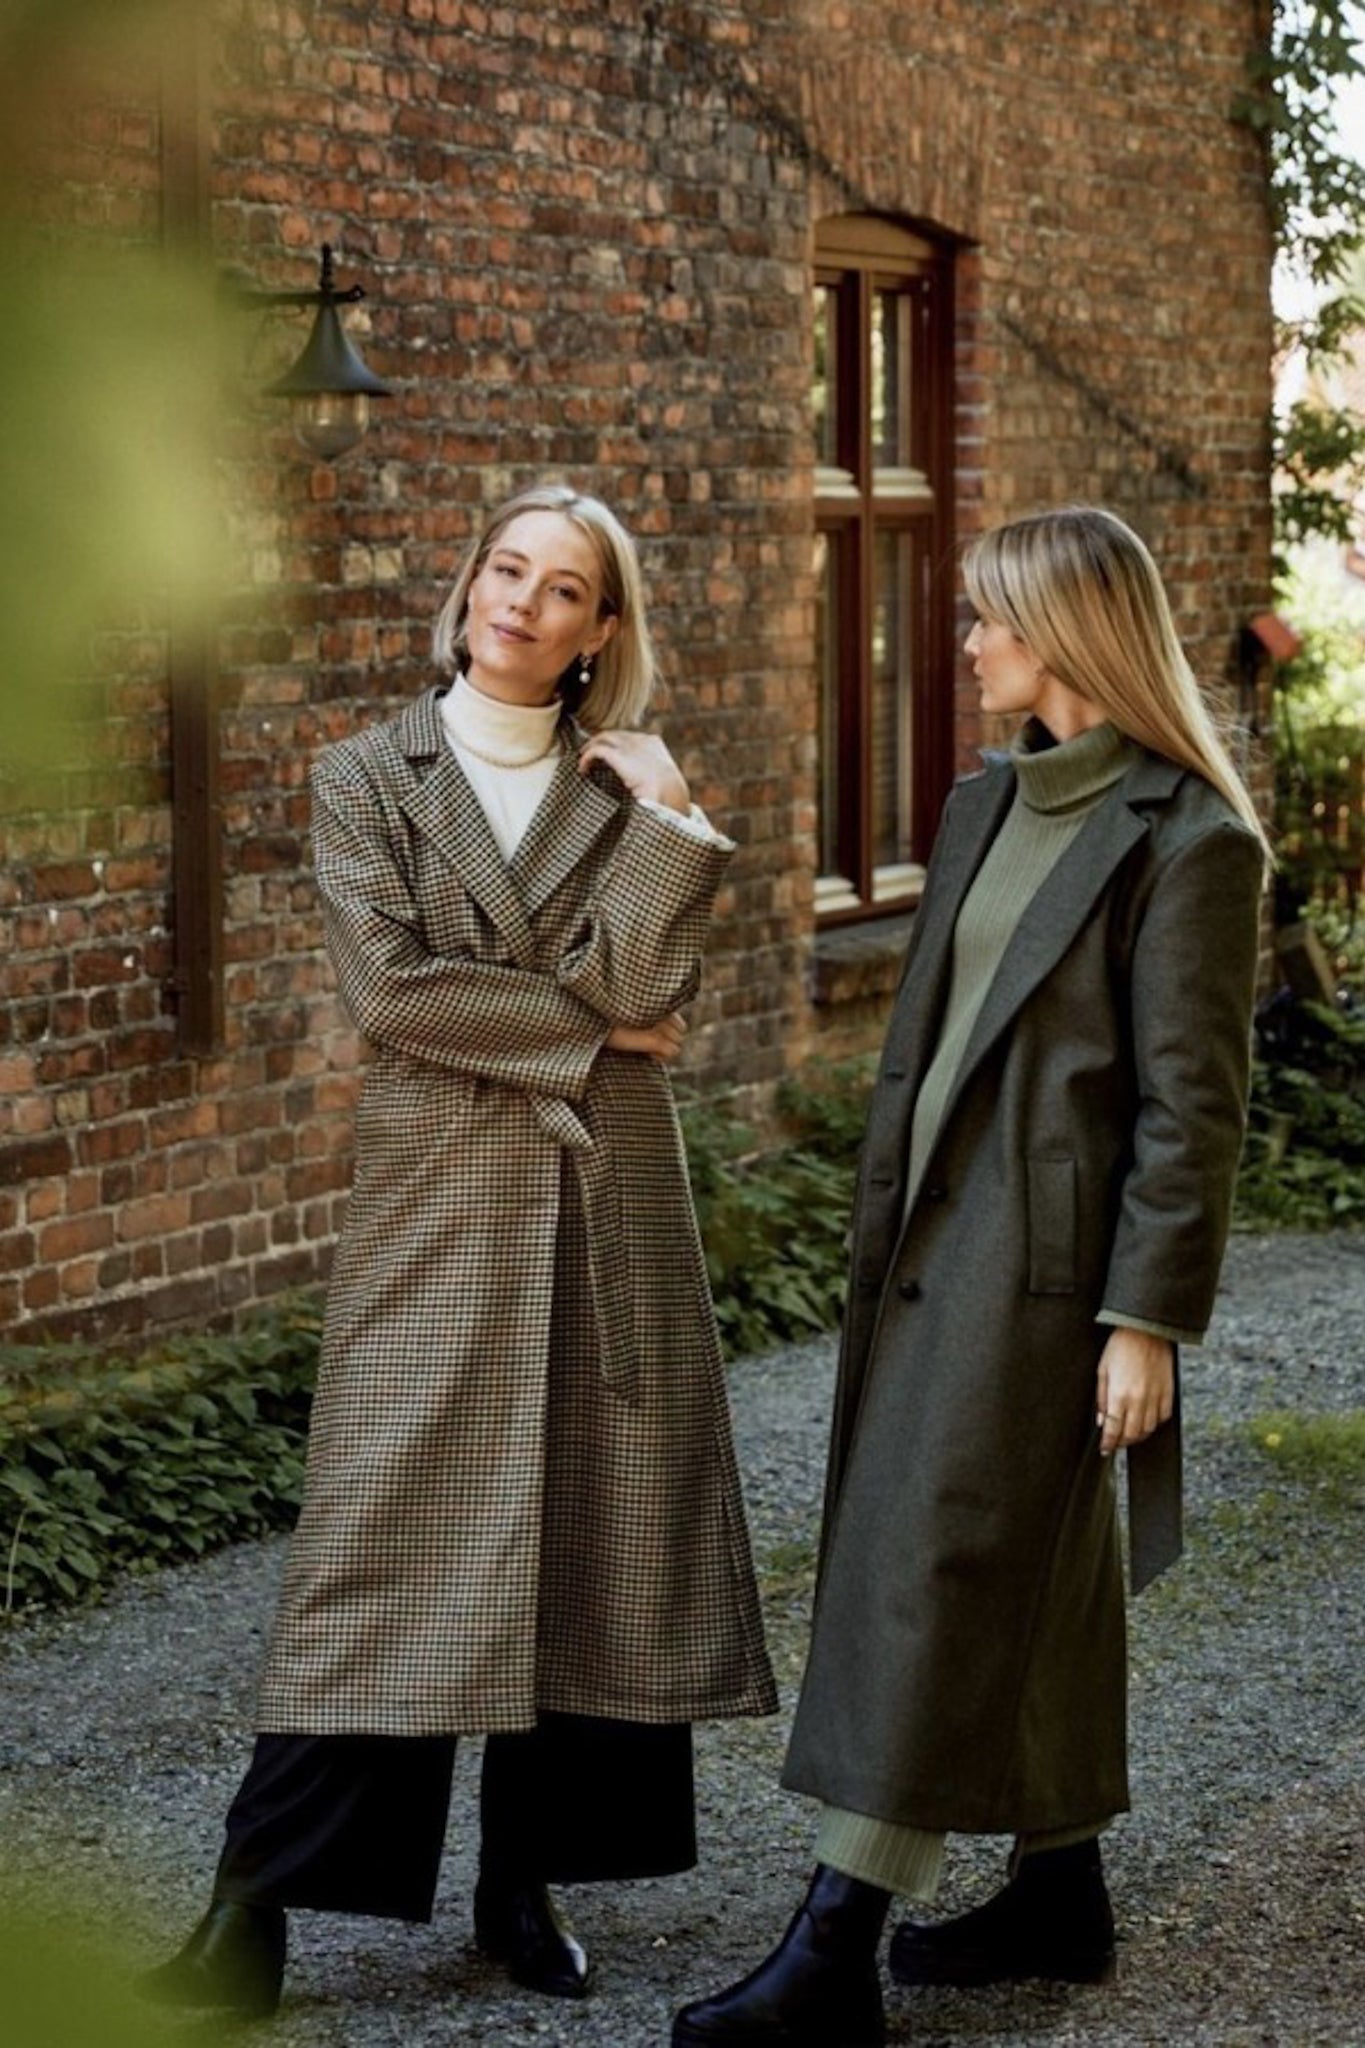 Two white women standing wearing long neutral coloured coats against a brick building